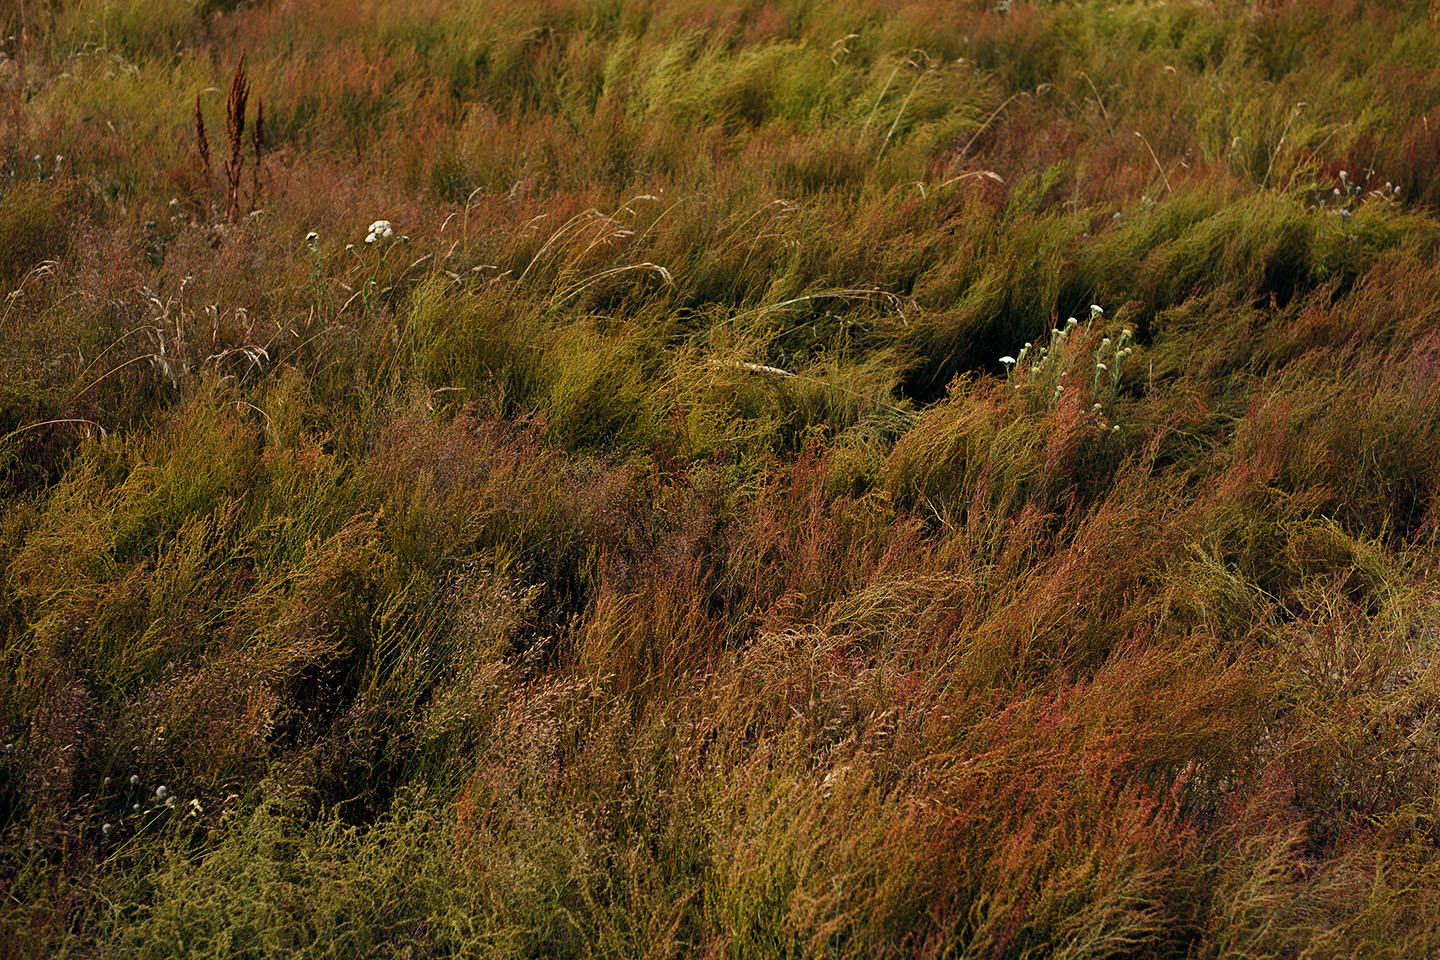 A natural landscape scene, primarily composed of a dense, wild grassy field. The grasses have a variety of colors, ranging from deep greens to rich reds and subtle yellows, indicating a mix of plant species and possibly the change of seasons. This diversity in color gives the image a textured, almost painterly quality. There are some taller plants that stand out above the rest, with white flowers or seed heads that punctuate the sea of grass with small dots of brightness. The lighting suggests either early morning or late afternoon, as the colors are vivid yet soft, which enhances the depth and complexity of the scene. The overall impression is one of untamed natural beauty, with the wildness of the flora suggesting an area that is not regularly maintained by humans.